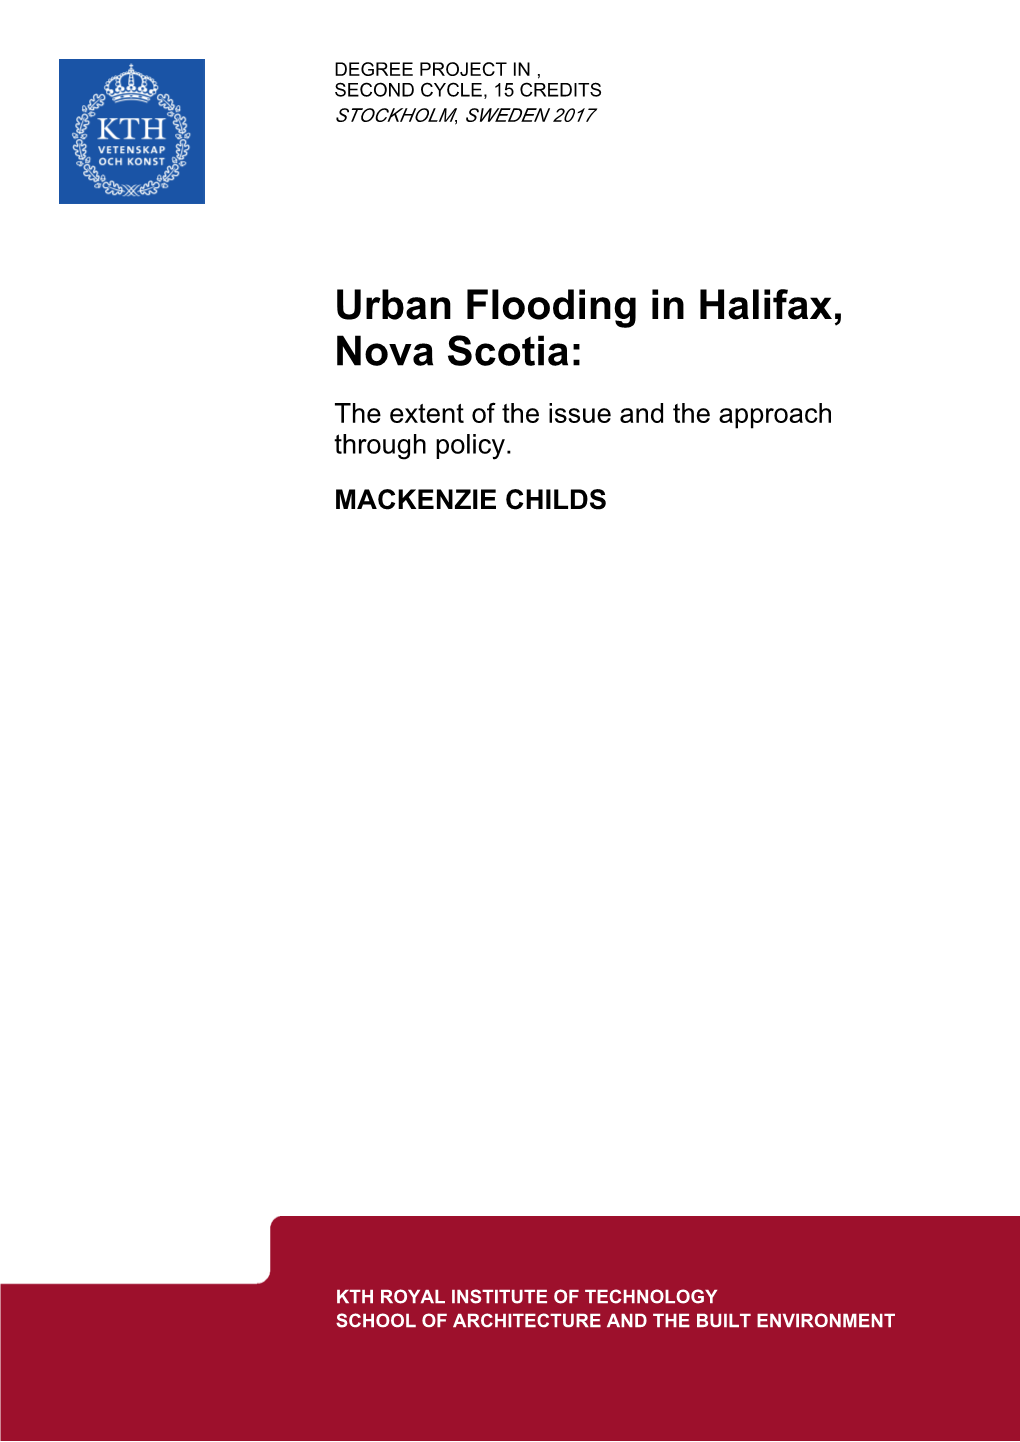 Urban Flooding in Halifax, Nova Scotia: the Extent of the Issue and the Approach Through Policy